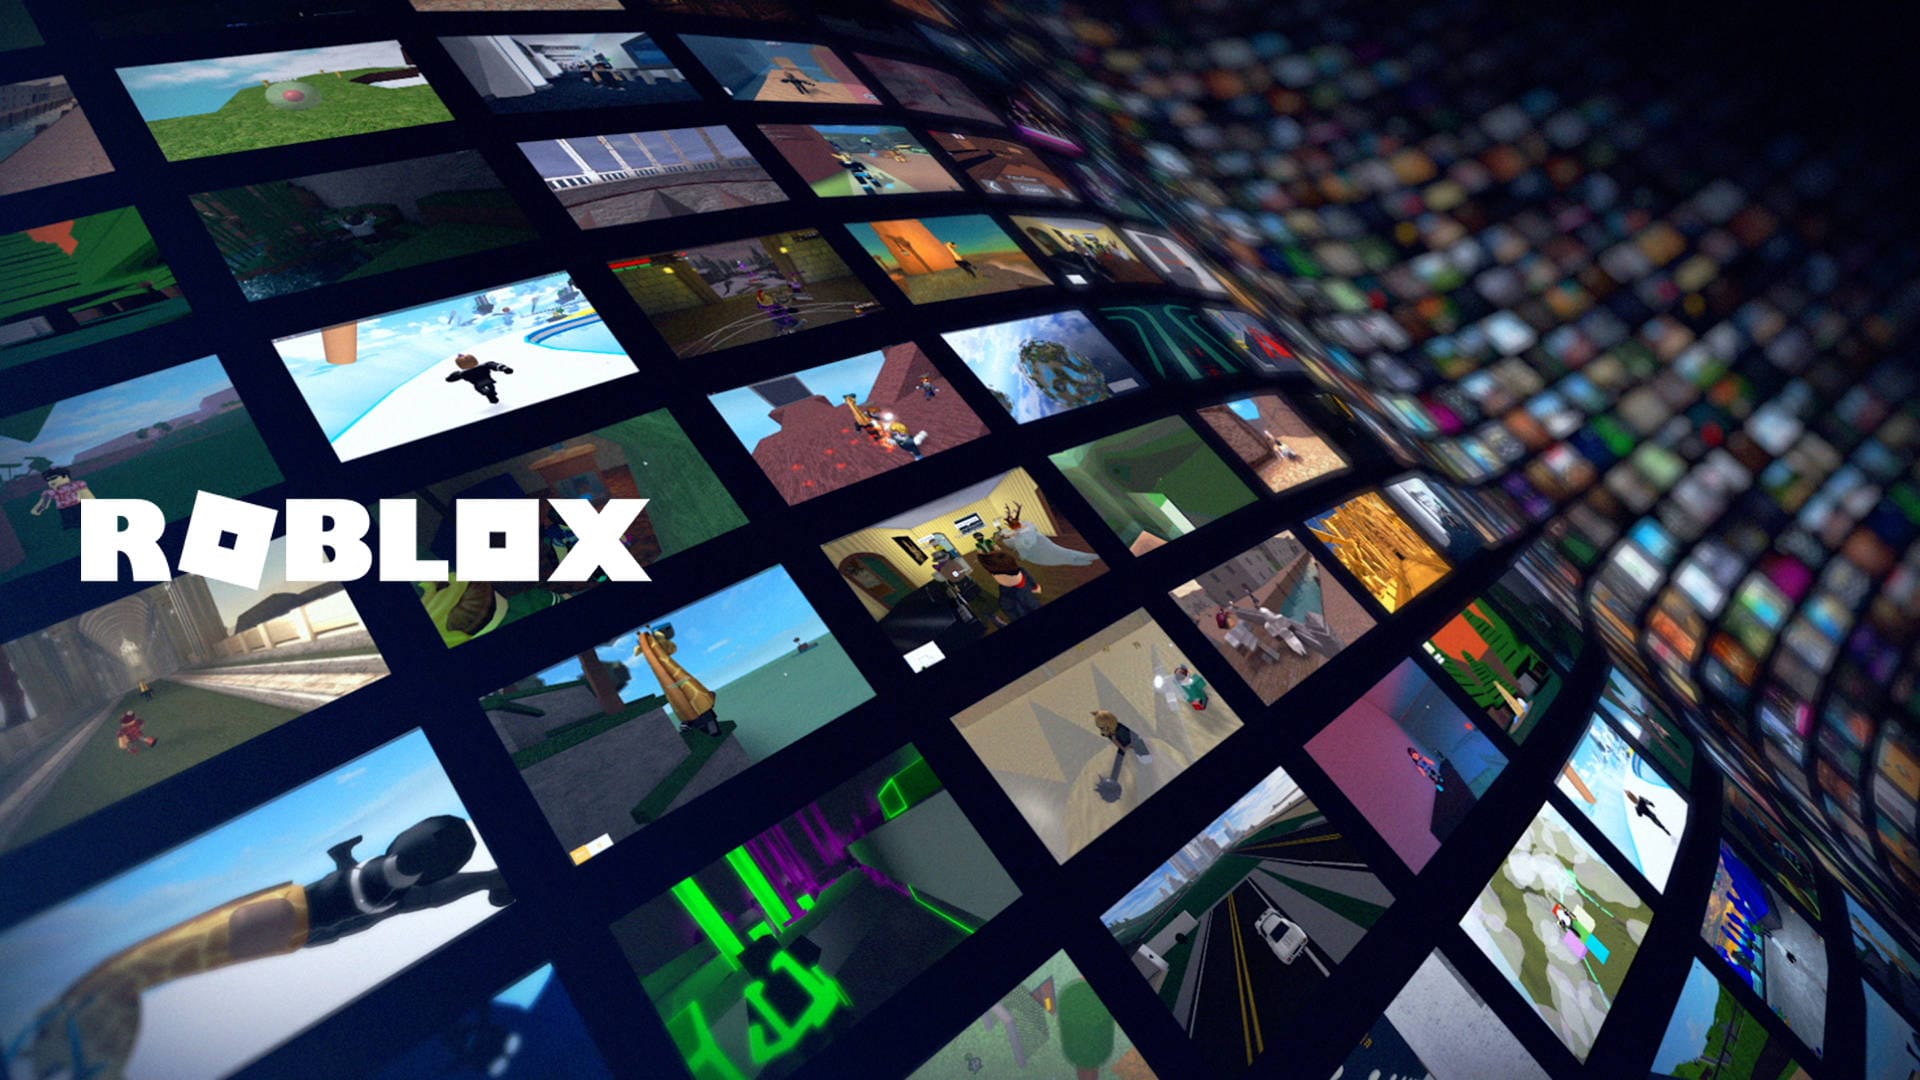 Bloxy News on X: Roblox has delayed their return to their San